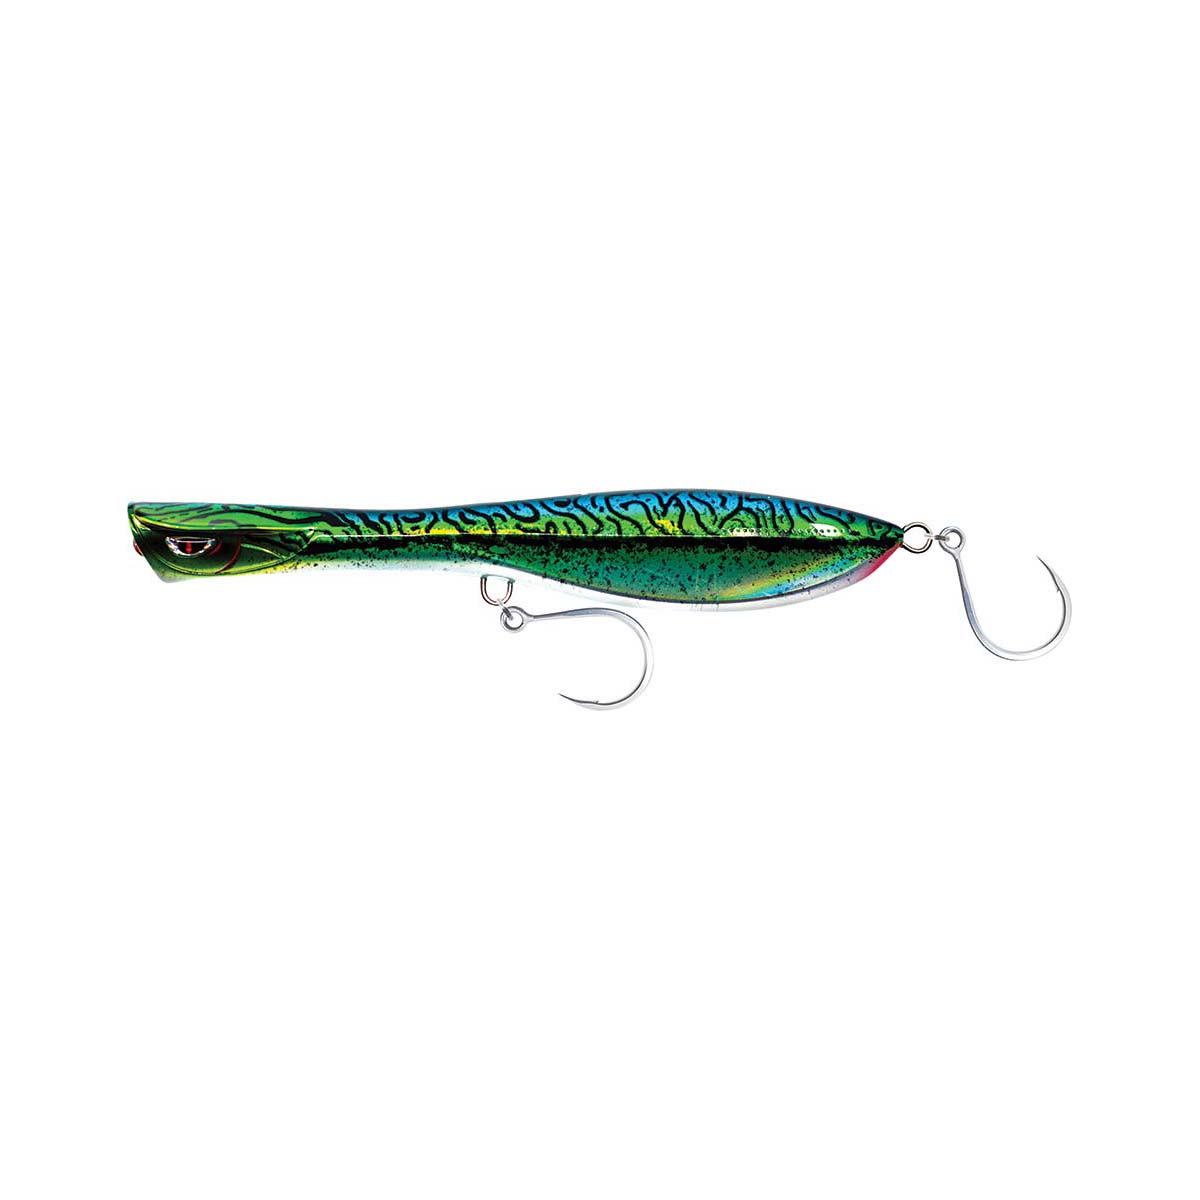 Nomad Dartwing Surface Stickbait Lure 13cm S Silver Green Mackerel